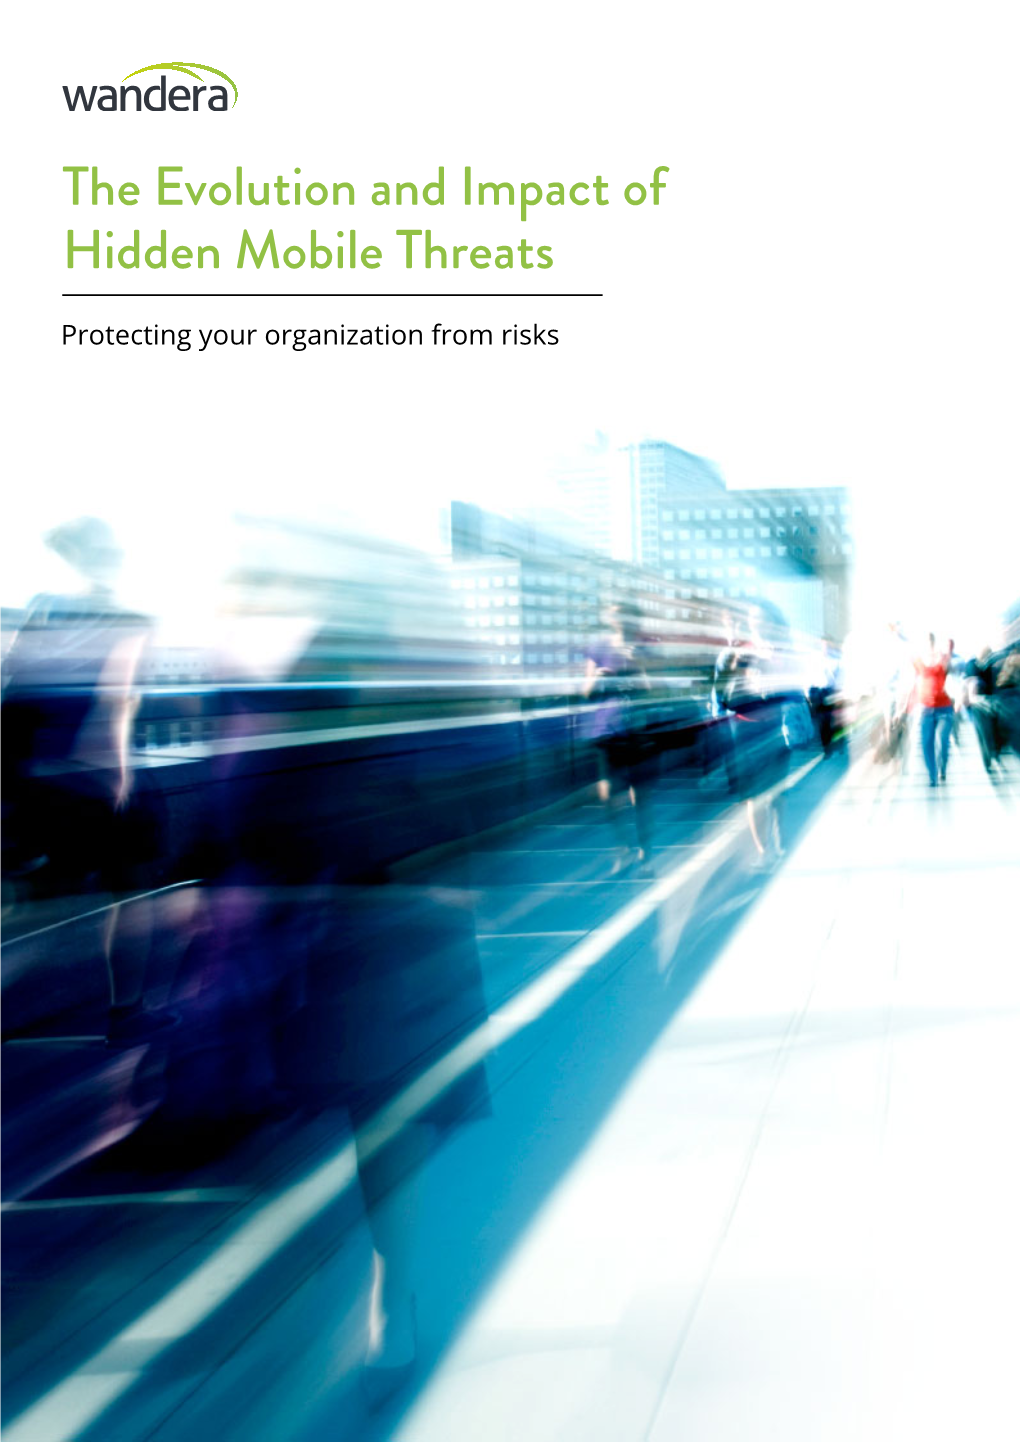 The Evolution and Impact of Hidden Mobile Threats